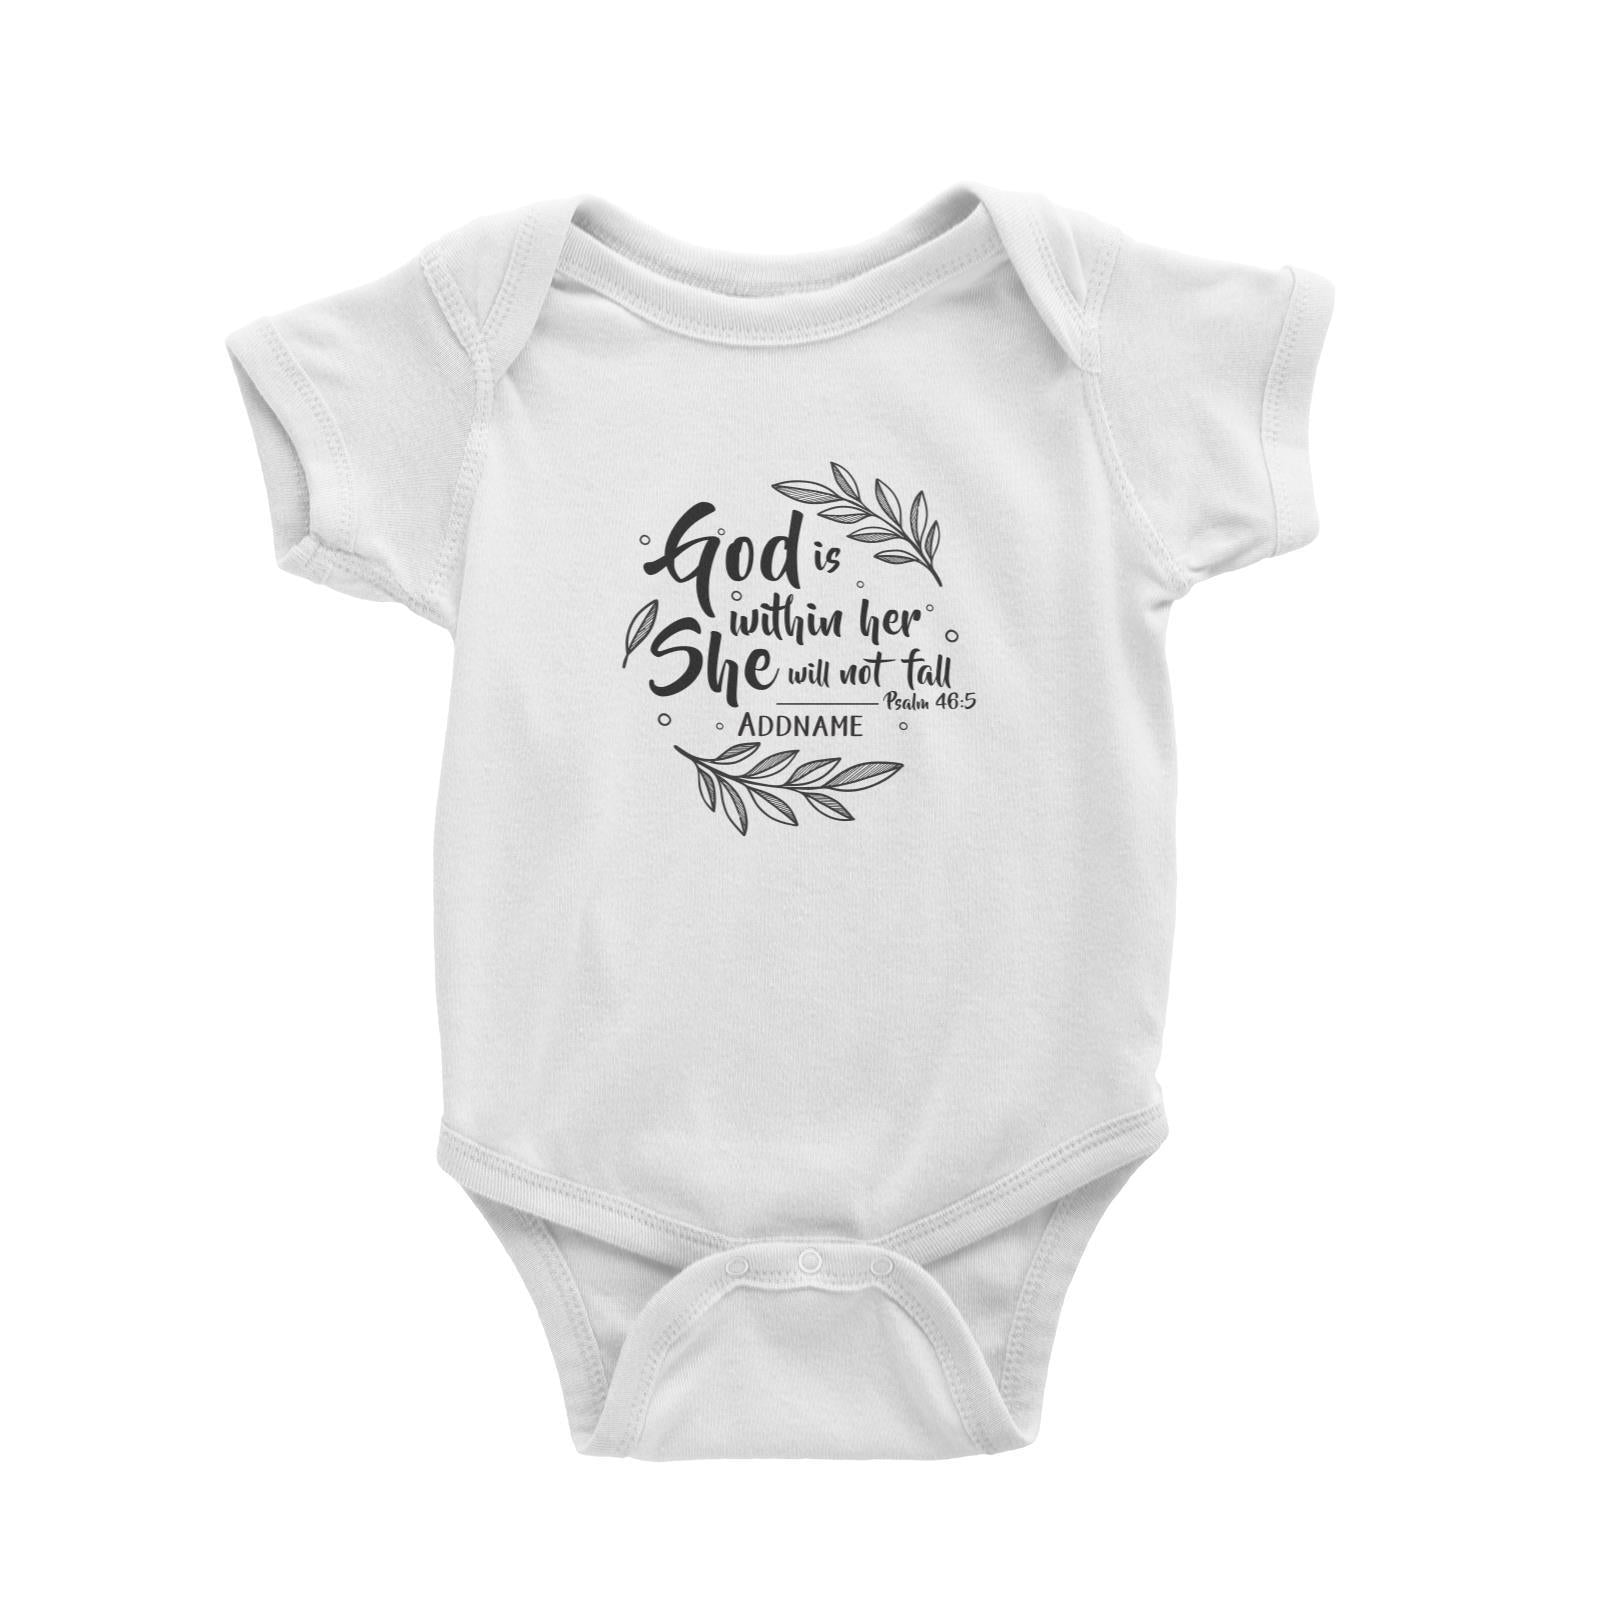 Christian For Her God is WIthin Her She Will Not Fall Psalm 46.5 Addname Baby Romper